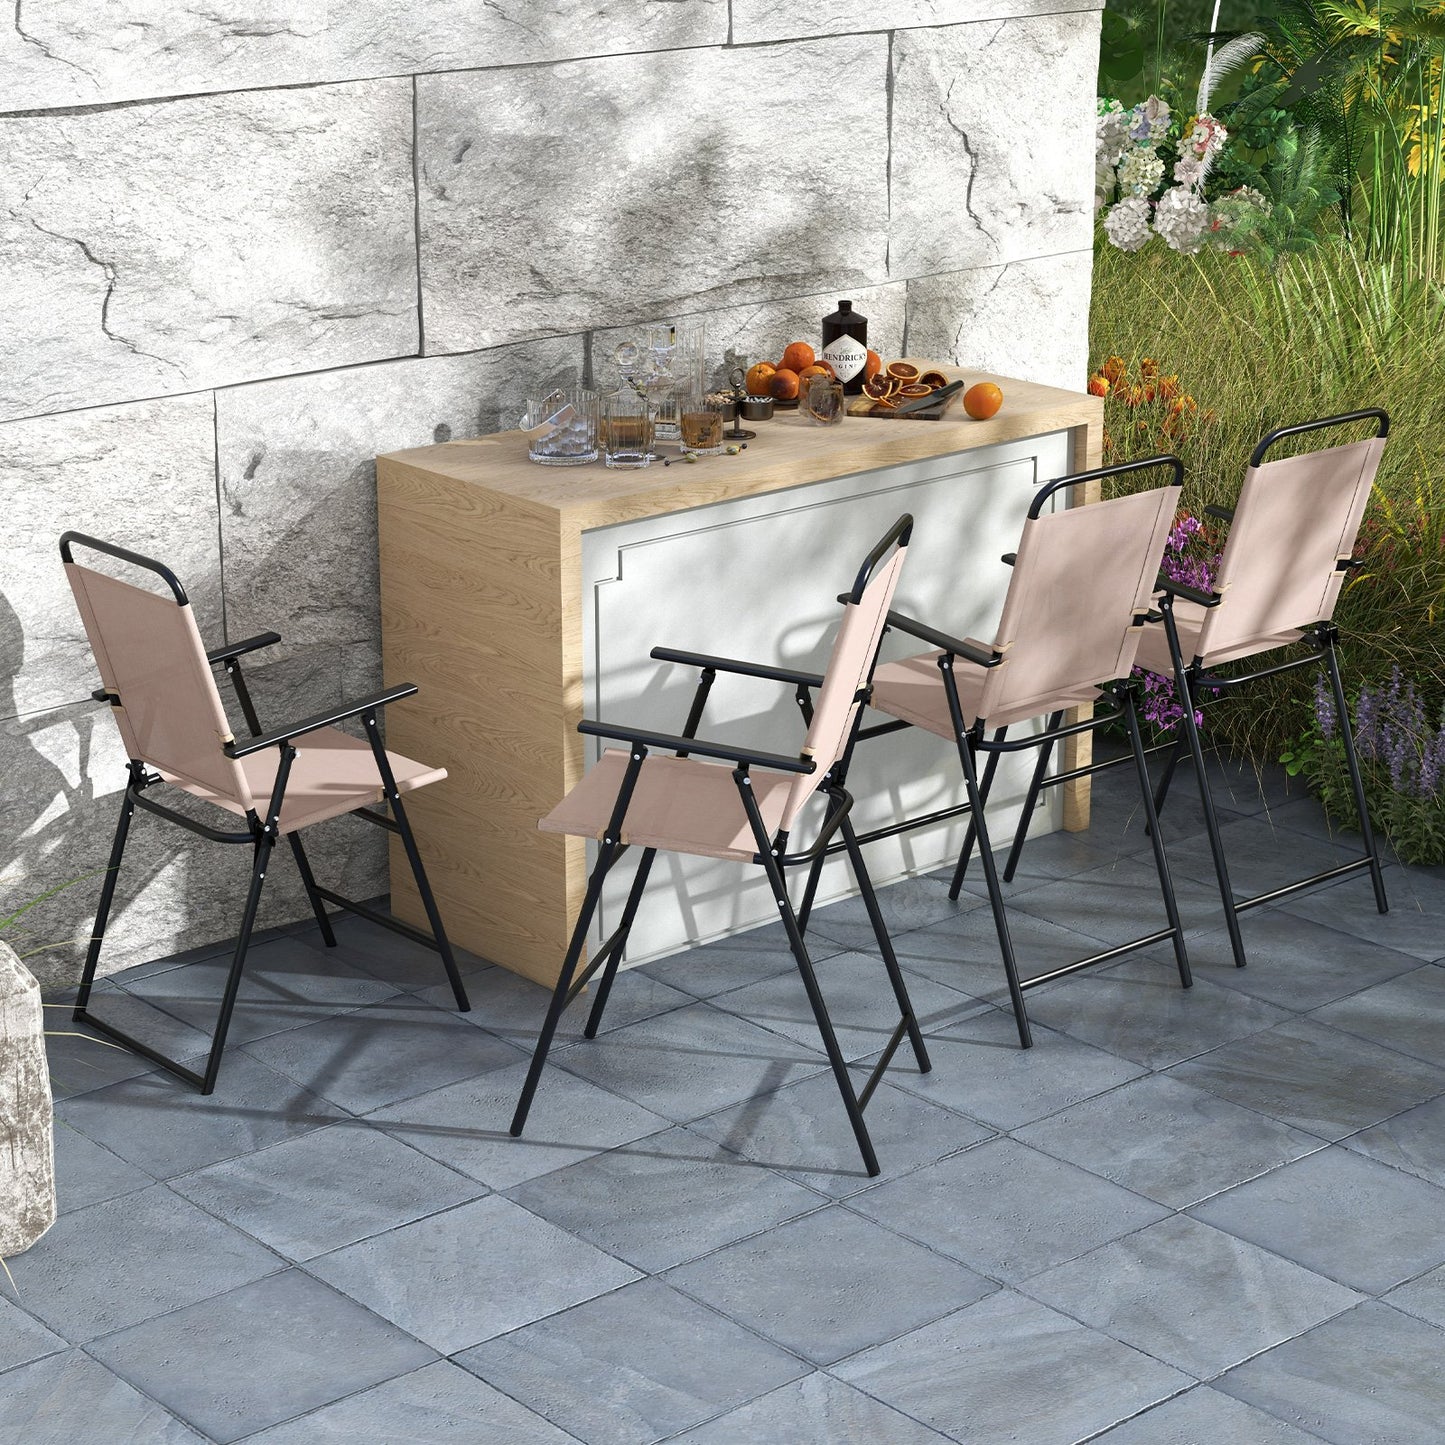 Set of 2 Patio Folding Bar-Height Chairs with Armrests and Quick-Drying Seat, Beige at Gallery Canada